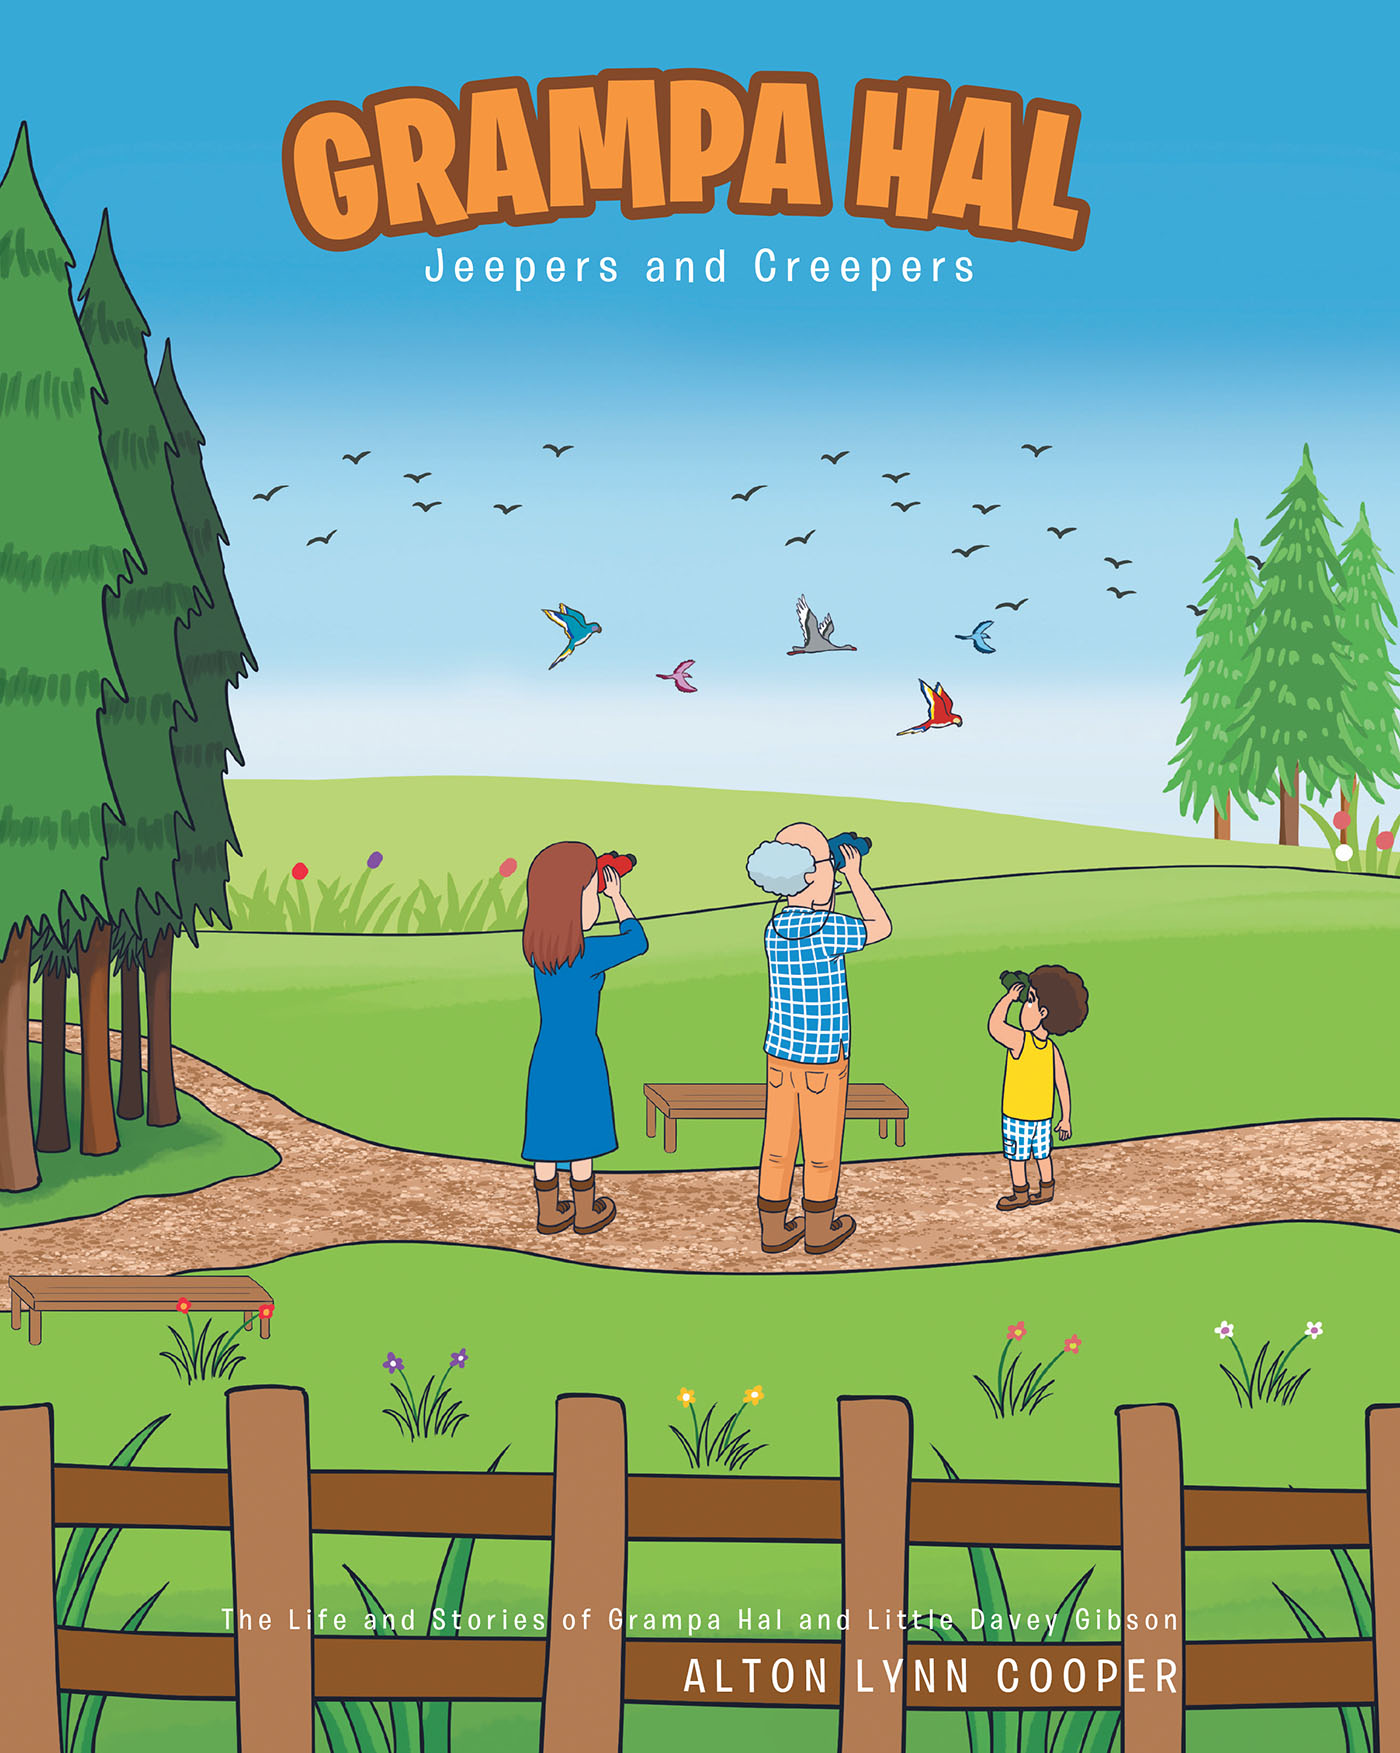 Alton Lynn Cooper’s Newly Released "Grampa Hal Jeepers and Creepers" is a Sweet Story of Adventure and Celebrating God’s Creation